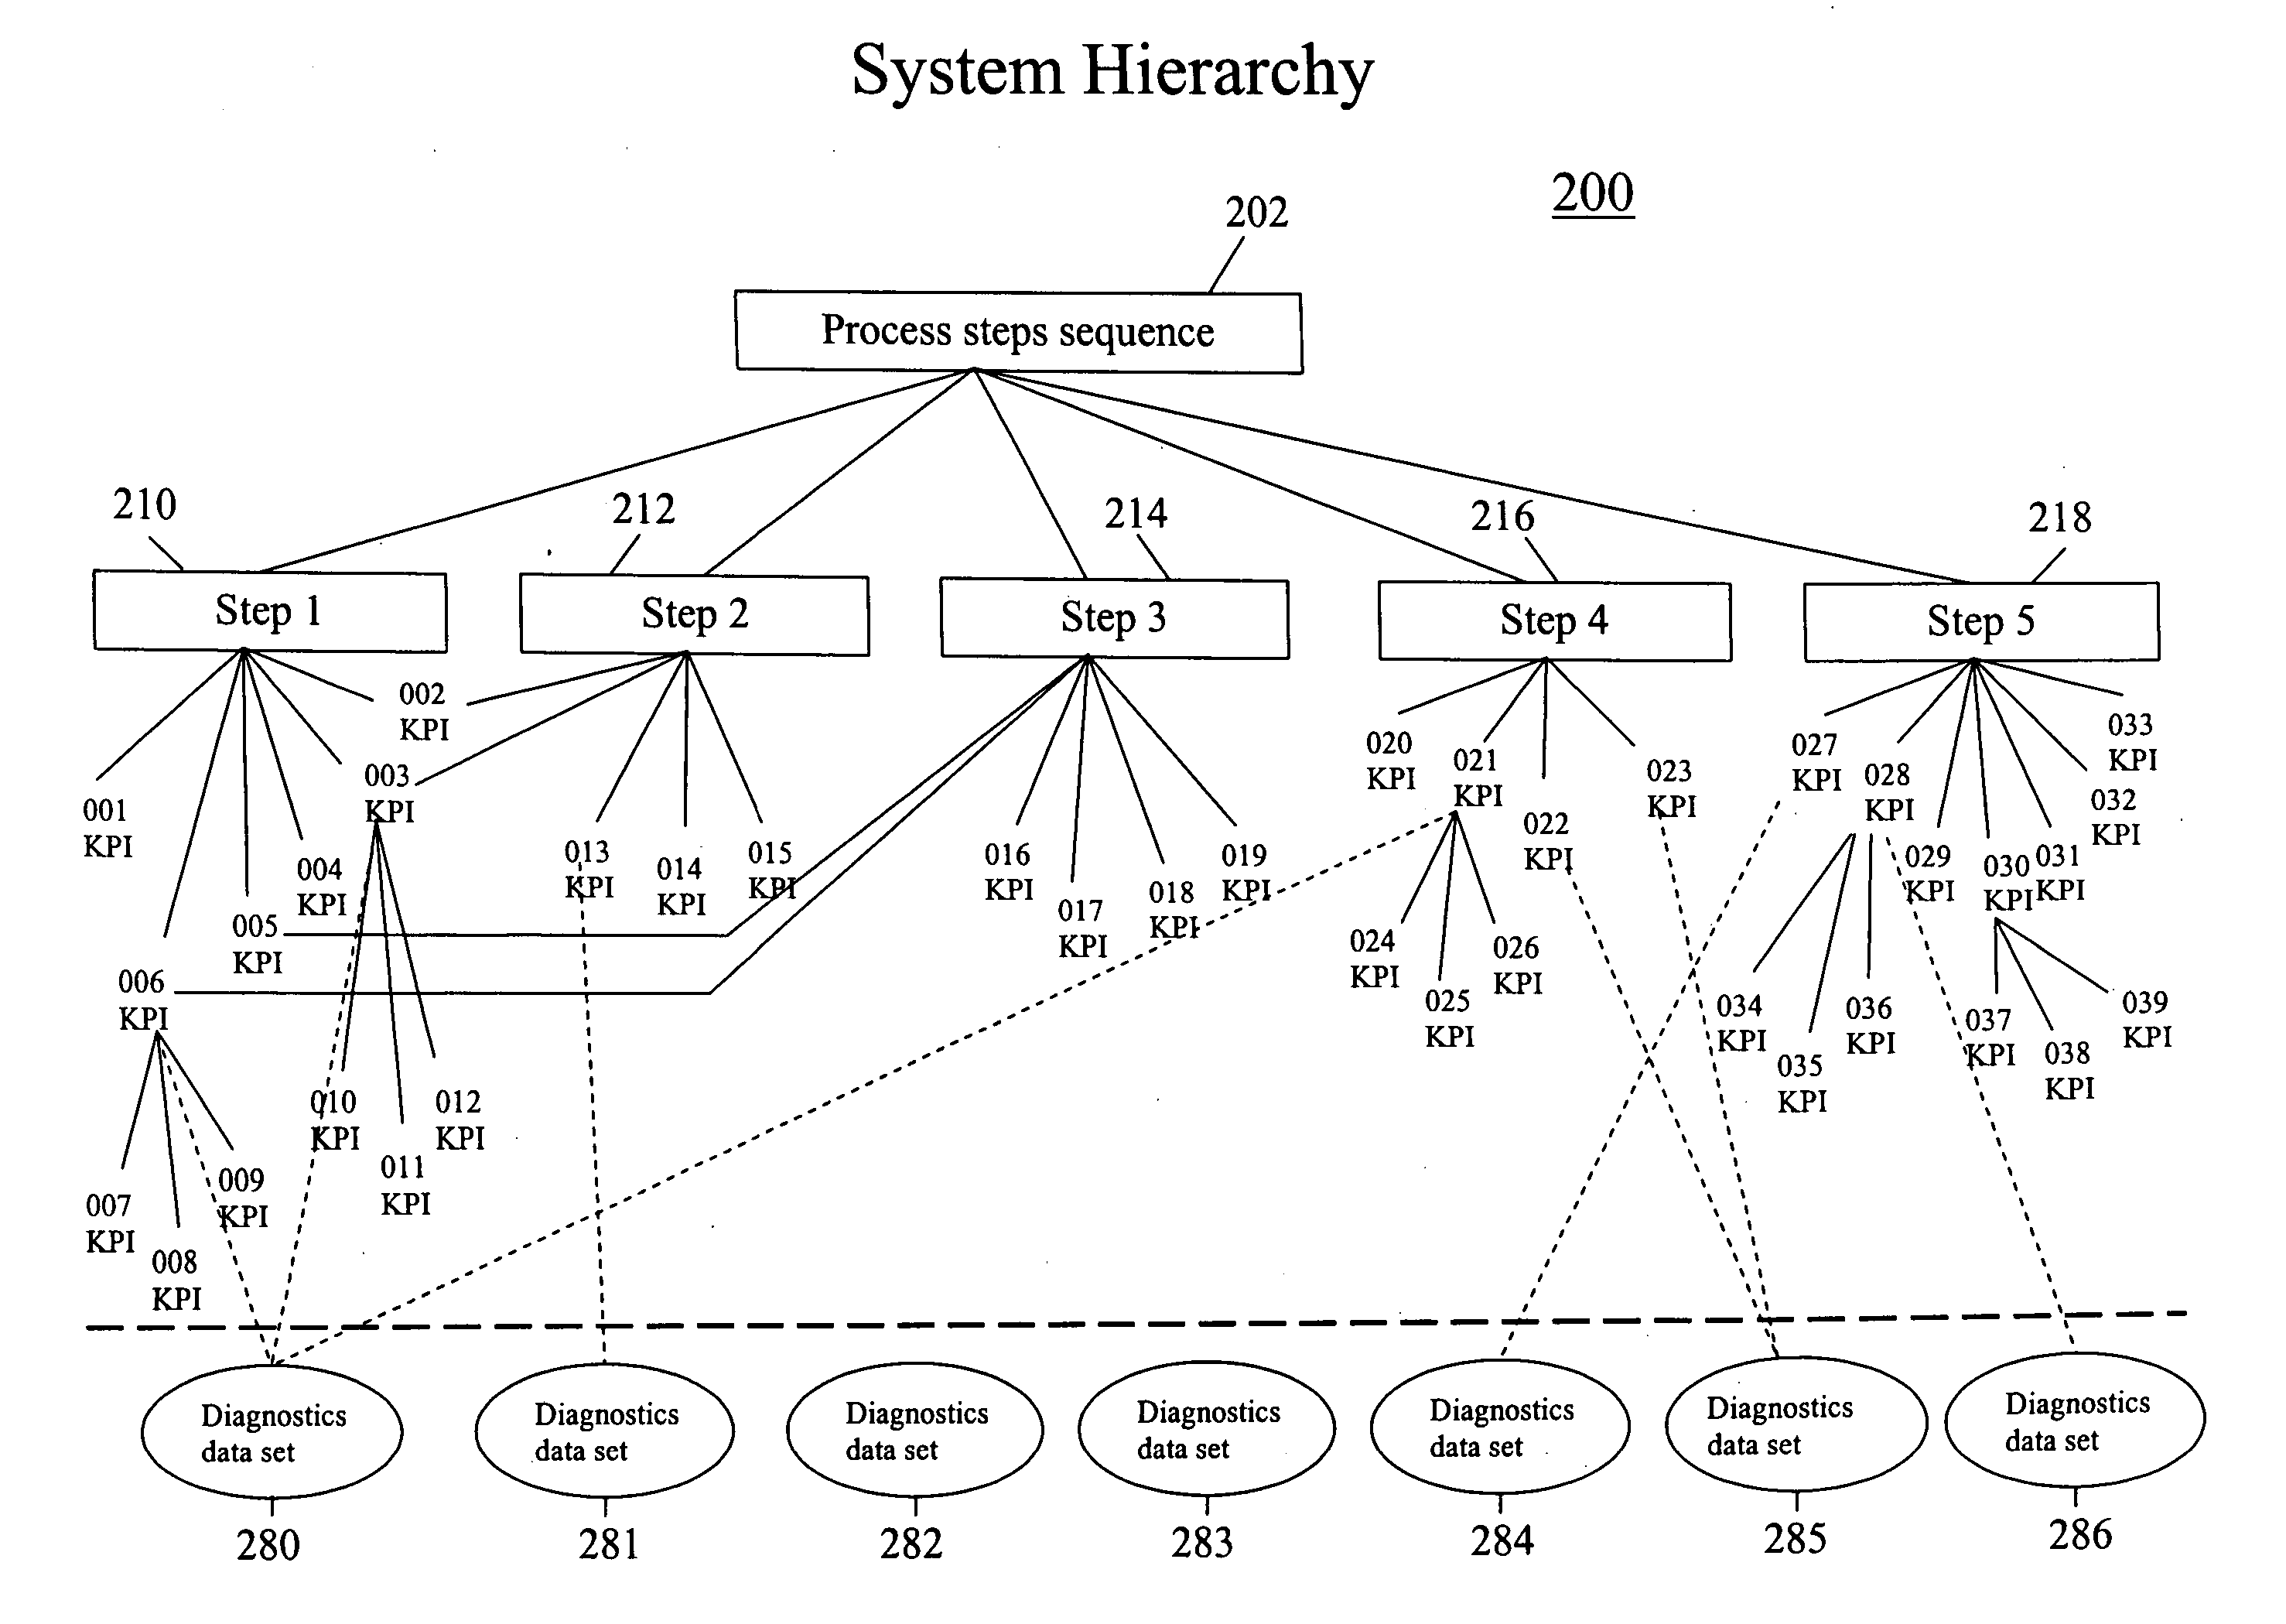 System and method of monitoring and diagnosing system condition and performance